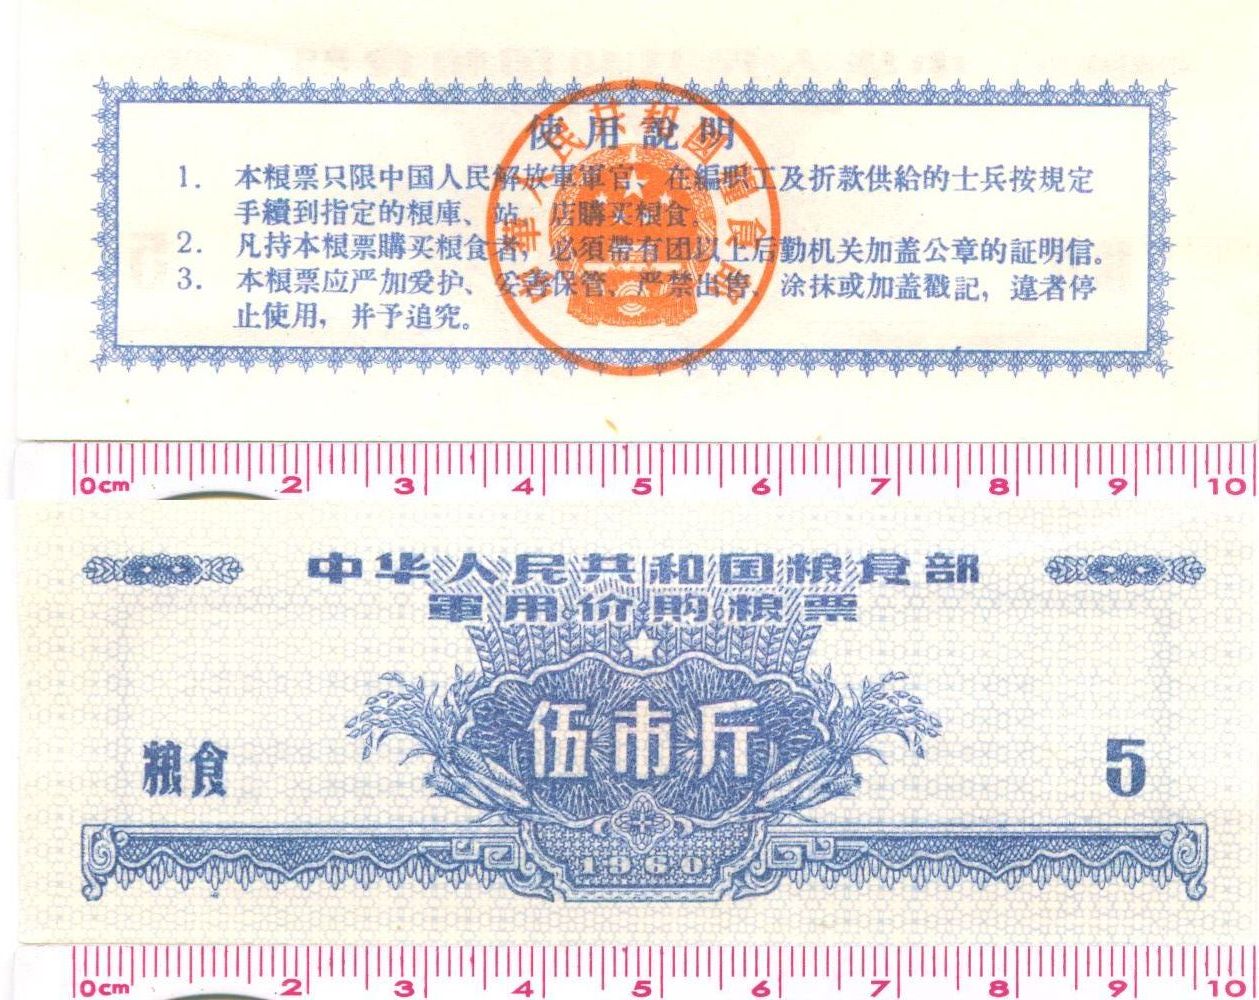 H0029, China Military Ration Coupons, 1968 Issue, 5 Jin (2.5 Kilogram)